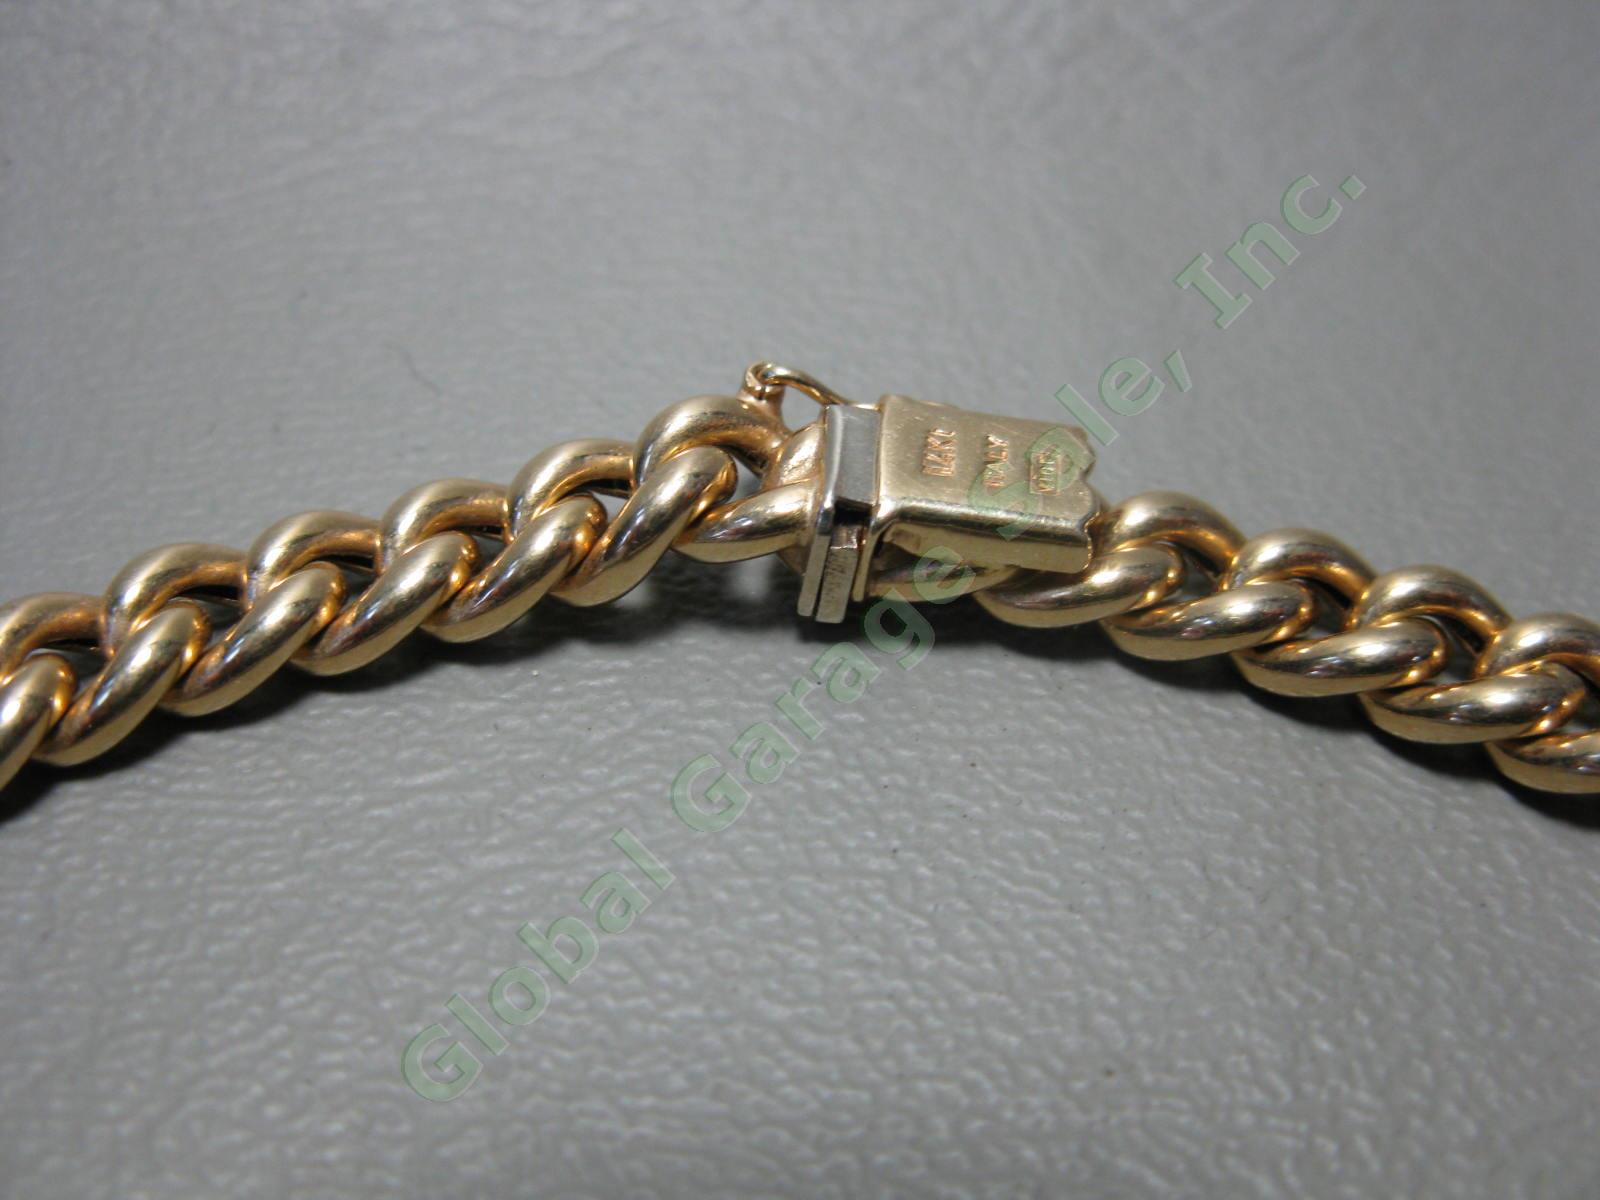 Heavy Vior 14k Solid Yellow Gold Link Chain 17" Necklace Choker 34 Grams Italy 2